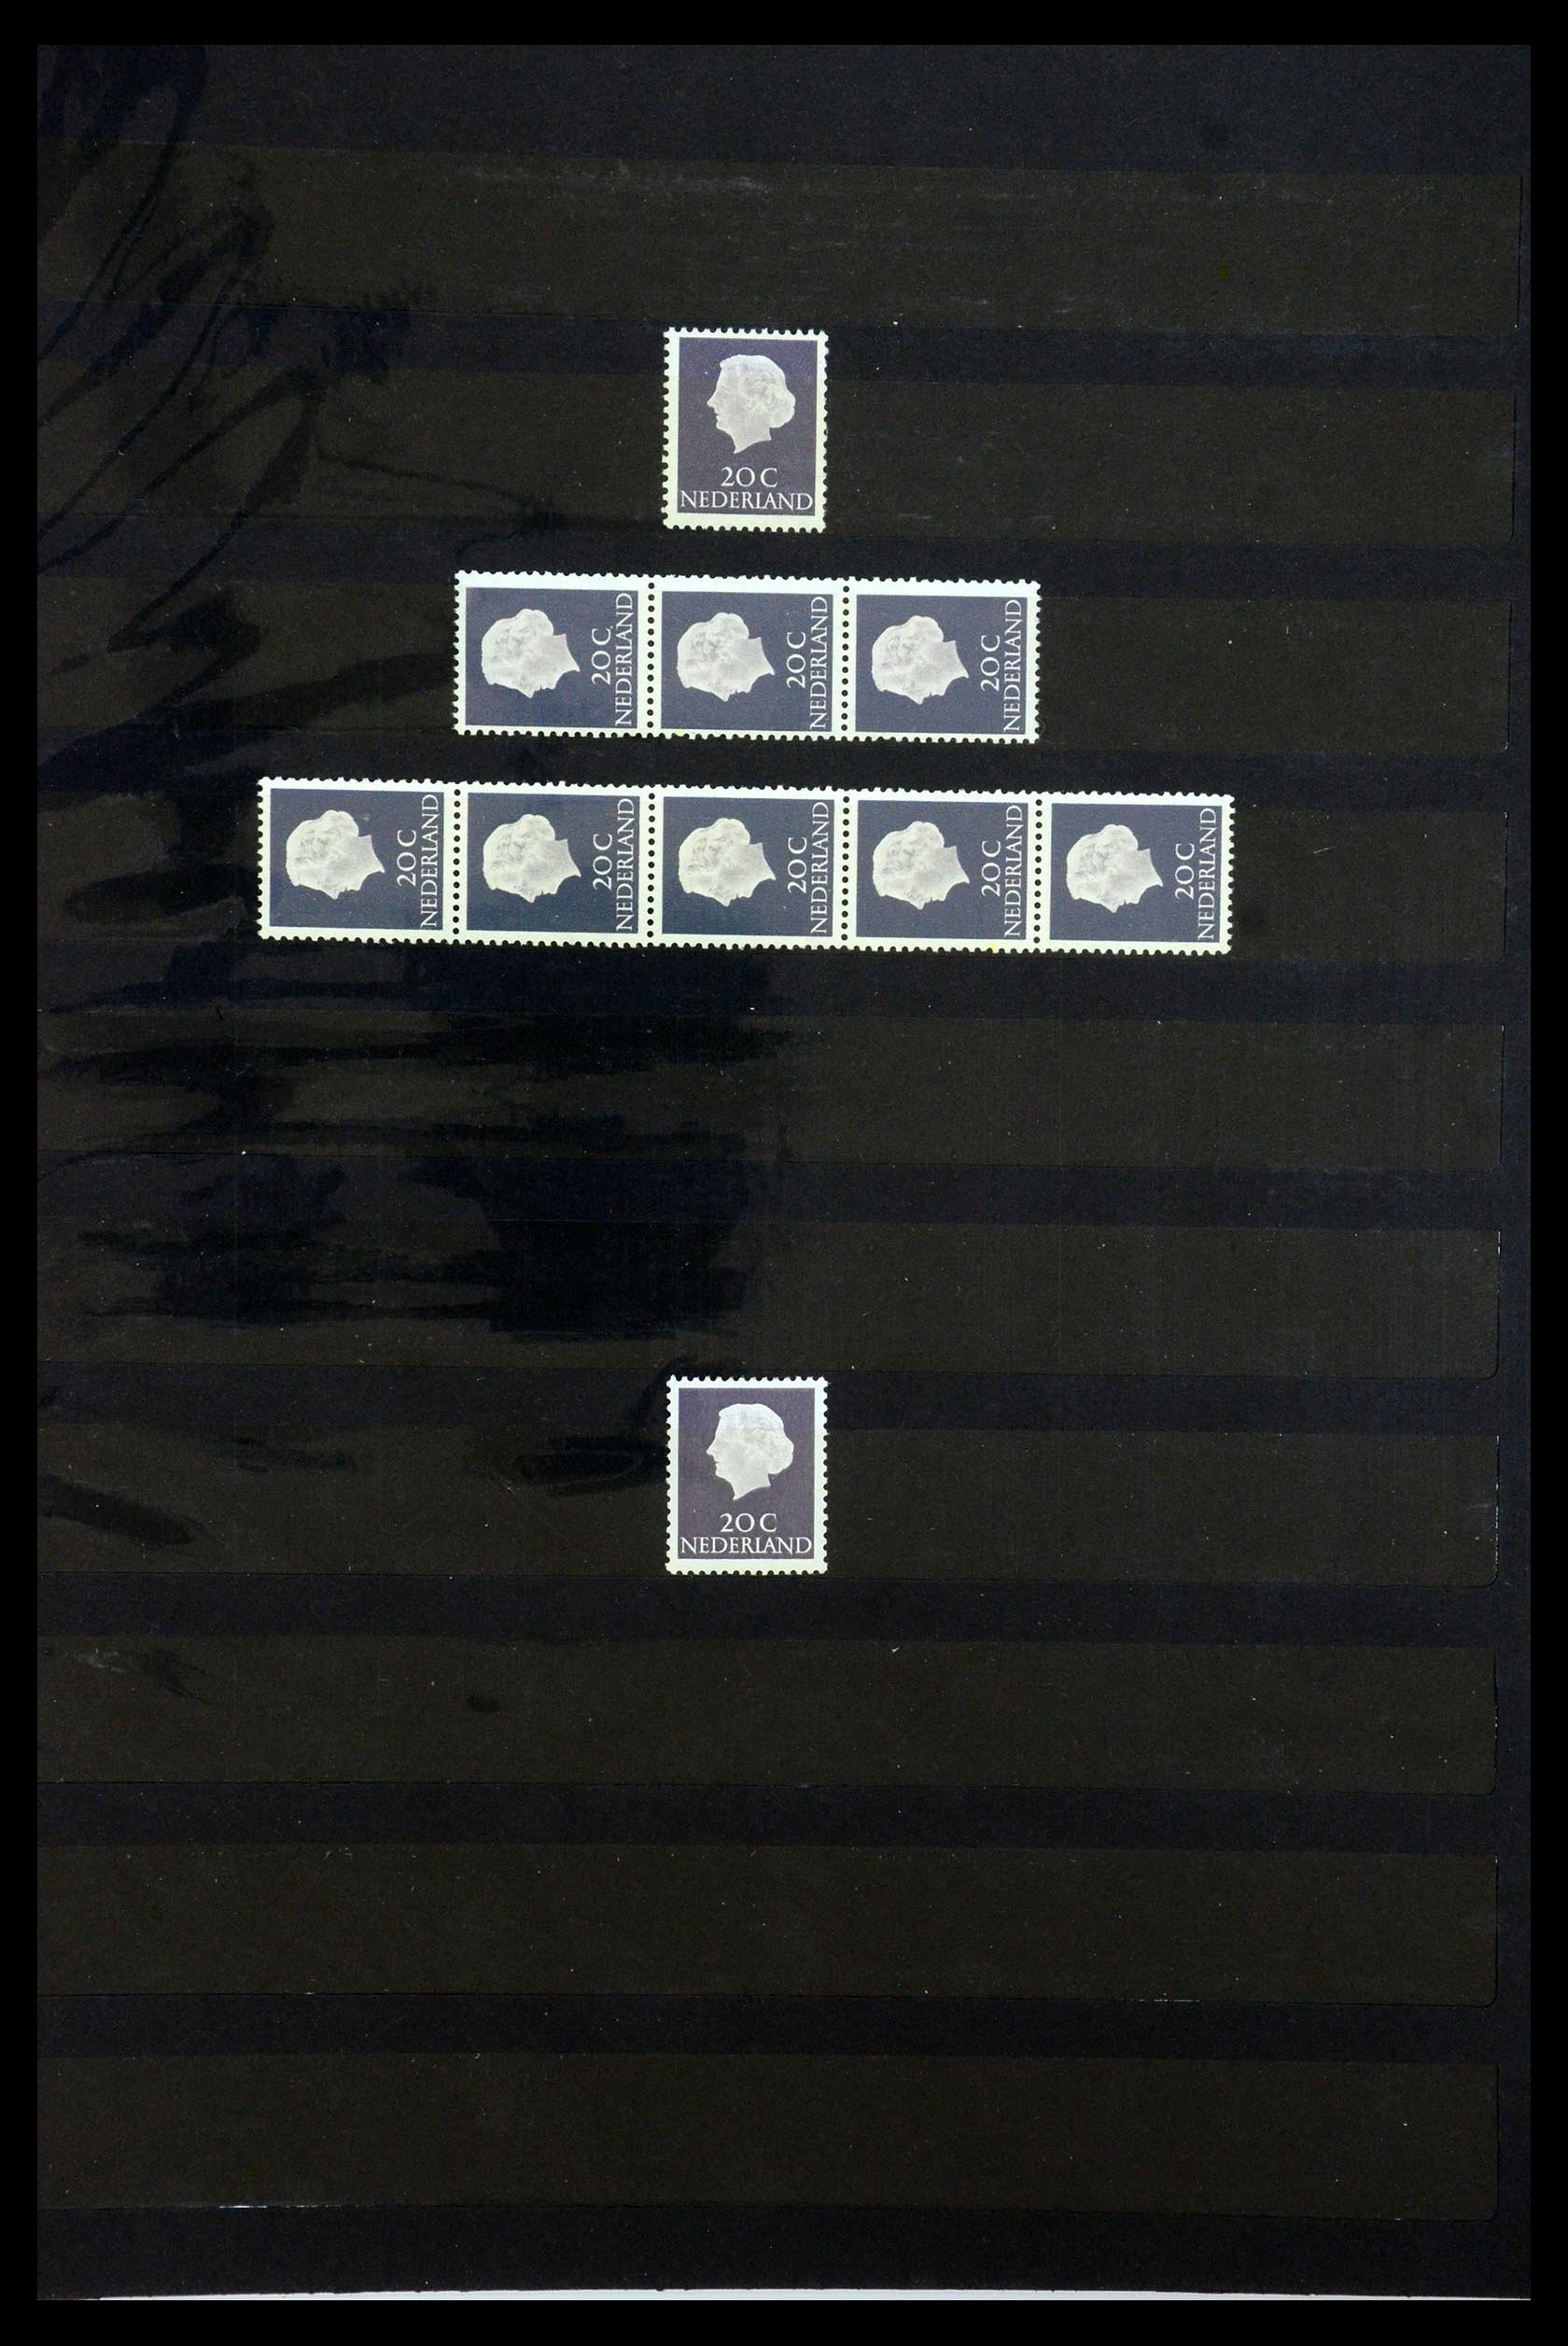 35543 017 - Stamp Collection 35543 Netherlands coilstamps 1965-1972.